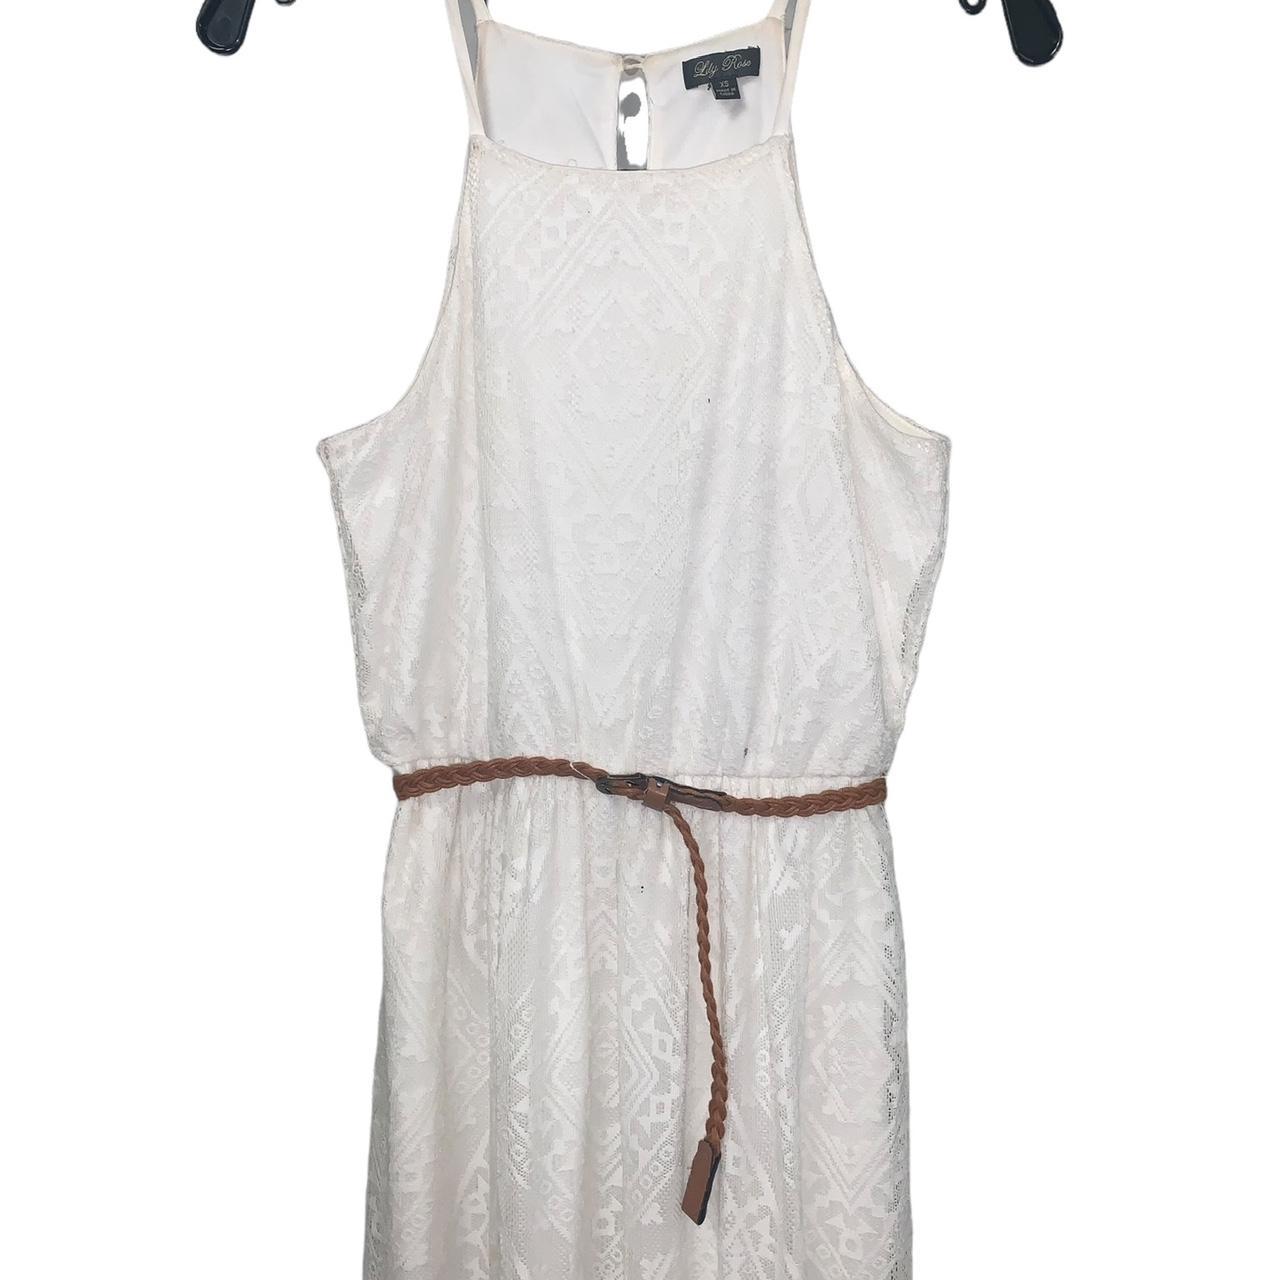 Lillian Rose Women's White and Brown Dress (3)